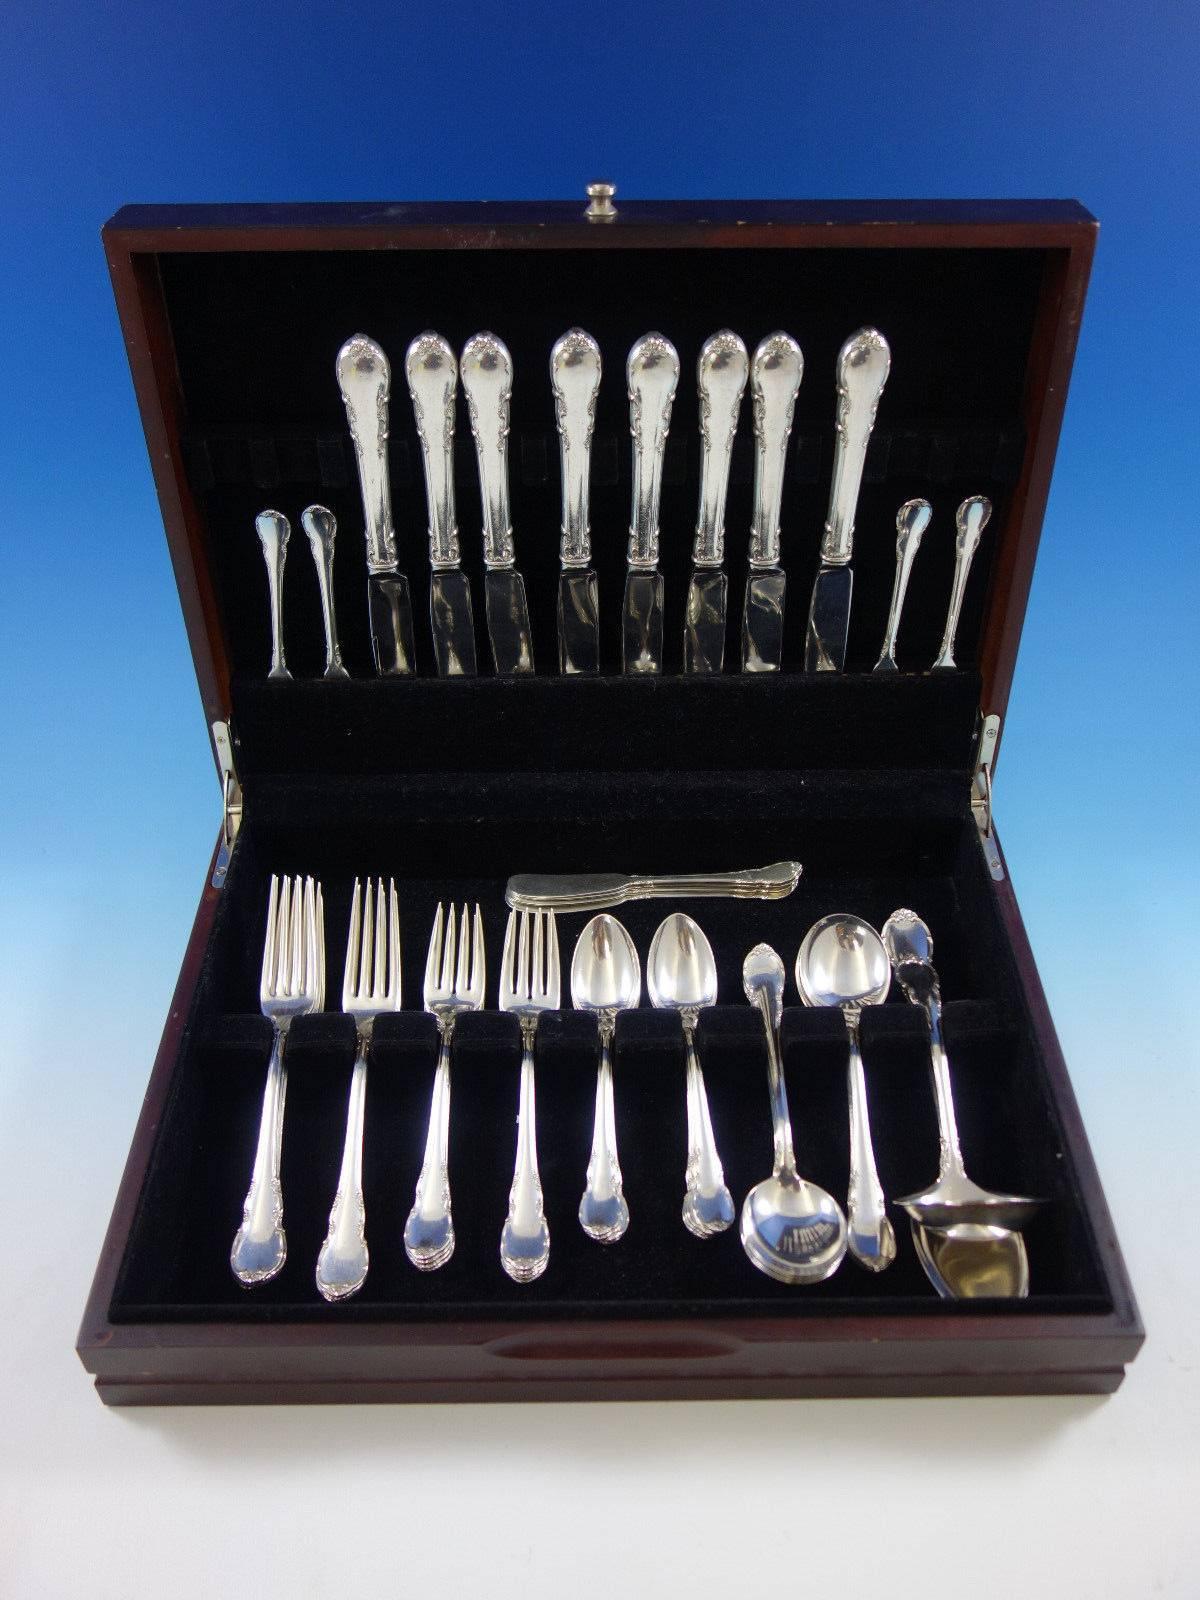 Lovely Modern Victorian by Lunt sterling silver flatware set of 50 pieces. This set includes: 

Eight knives, 8 3/4